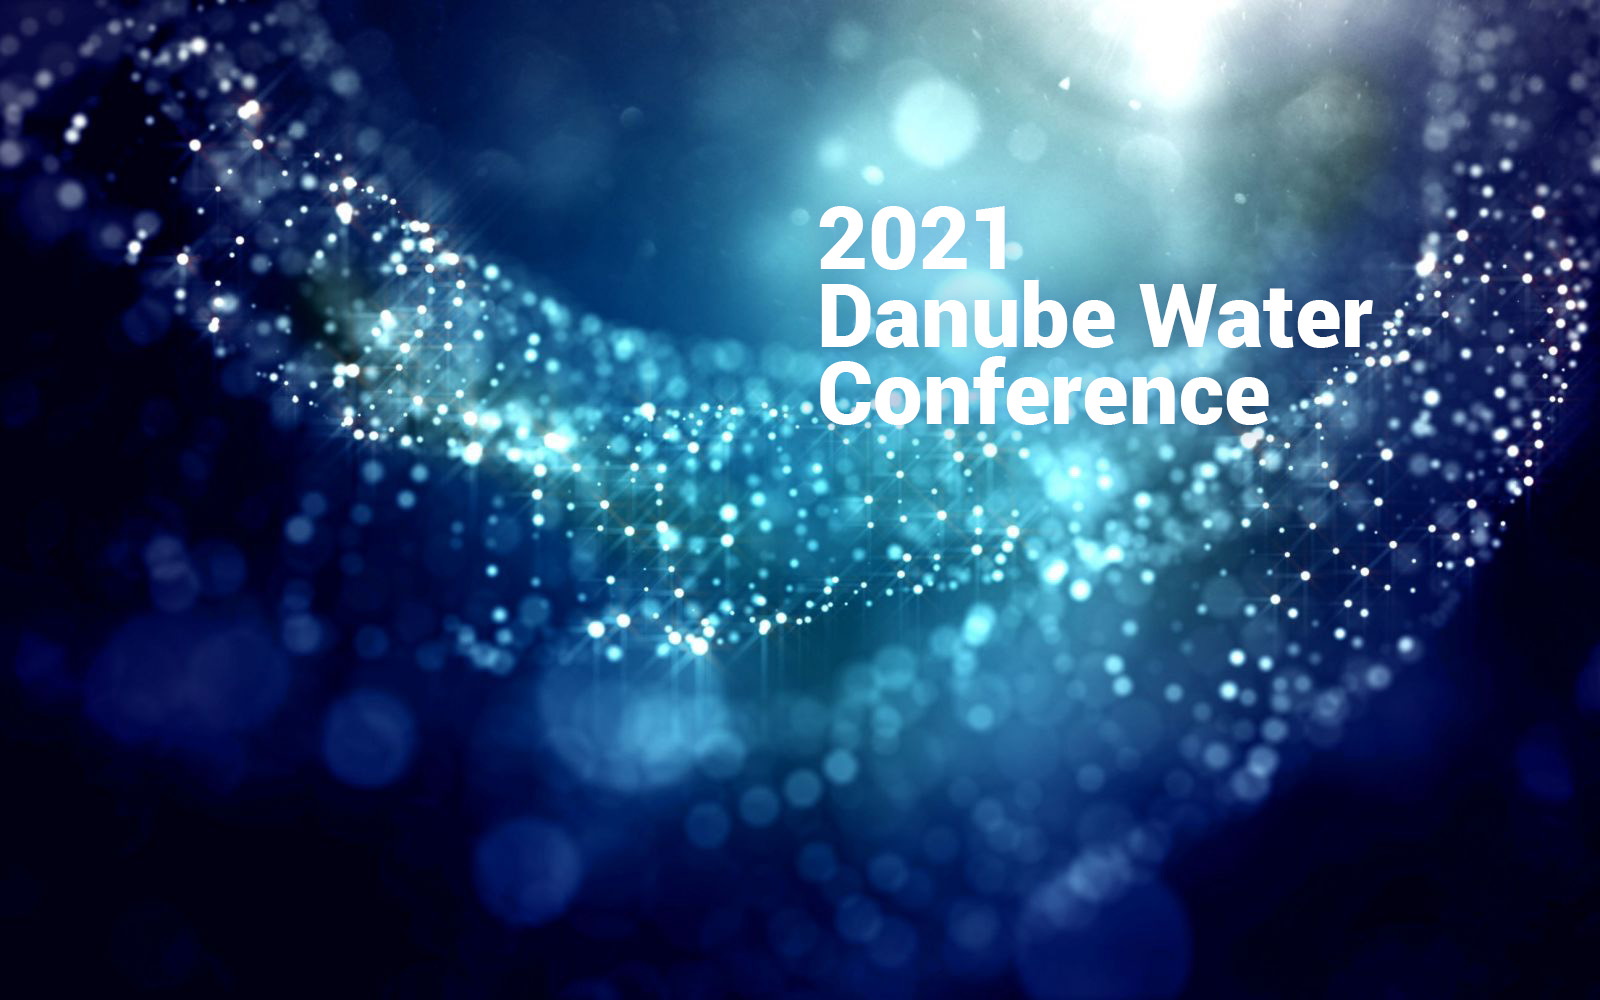 2021 Danube Water Conference: Here are Five Good Reasons not to Miss This